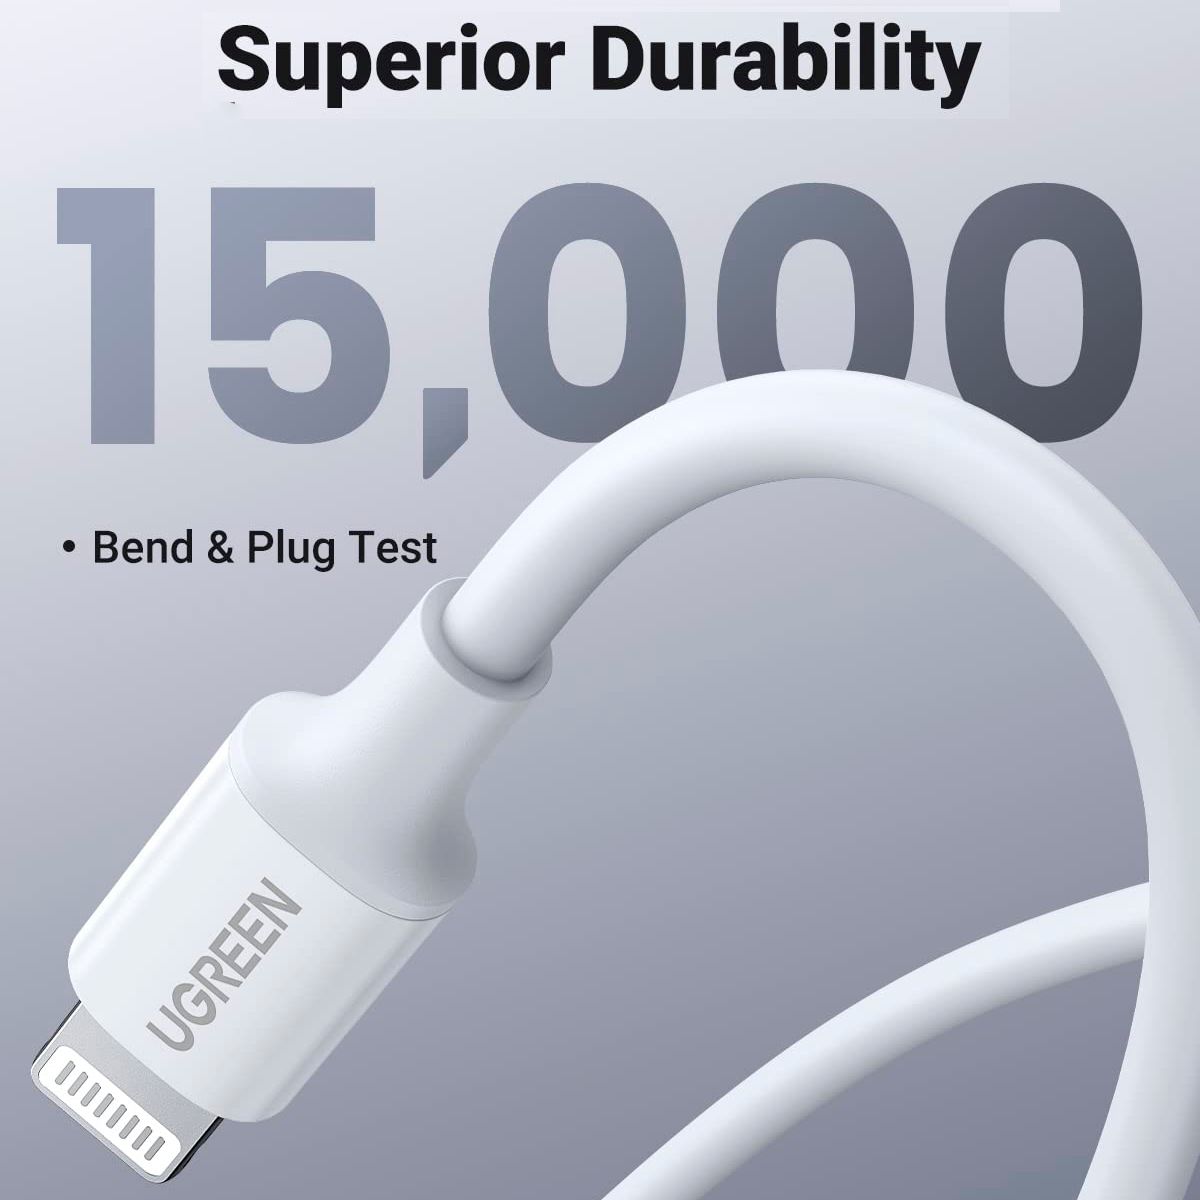 Кабель UGREEN US171 Type-C - Lightning PD 20W 3A Cable Rubber Shell 2m White (60749) 00996 фото